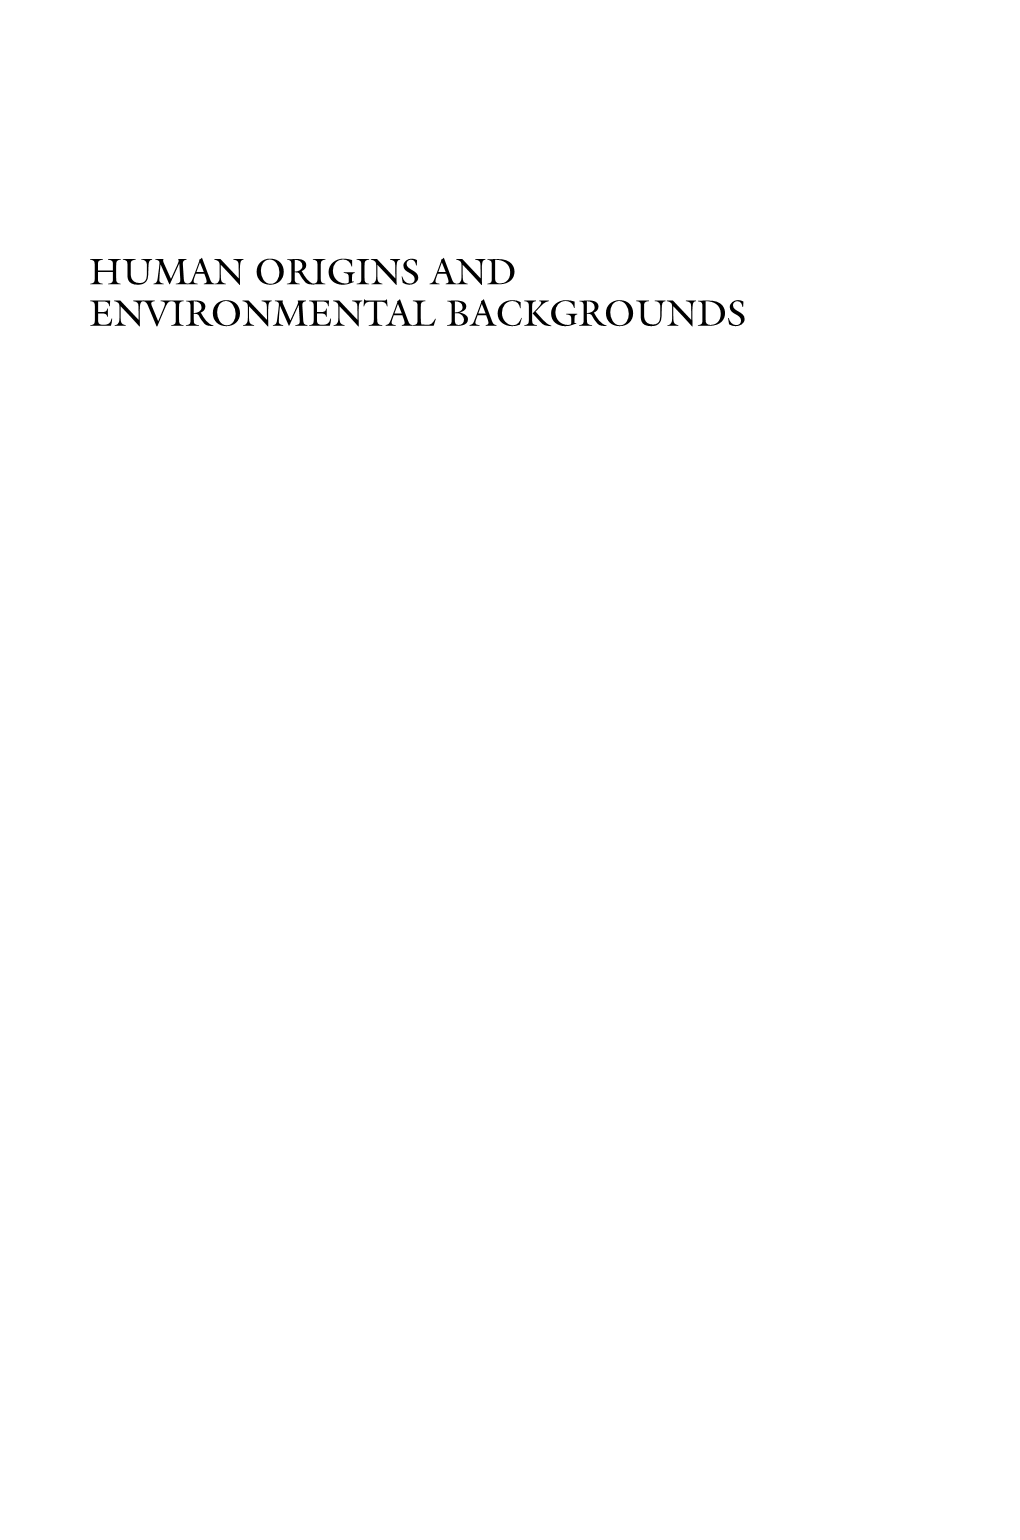 Human Origins and Environmental Backgrounds Developments in Primatology: Progress and Prospects